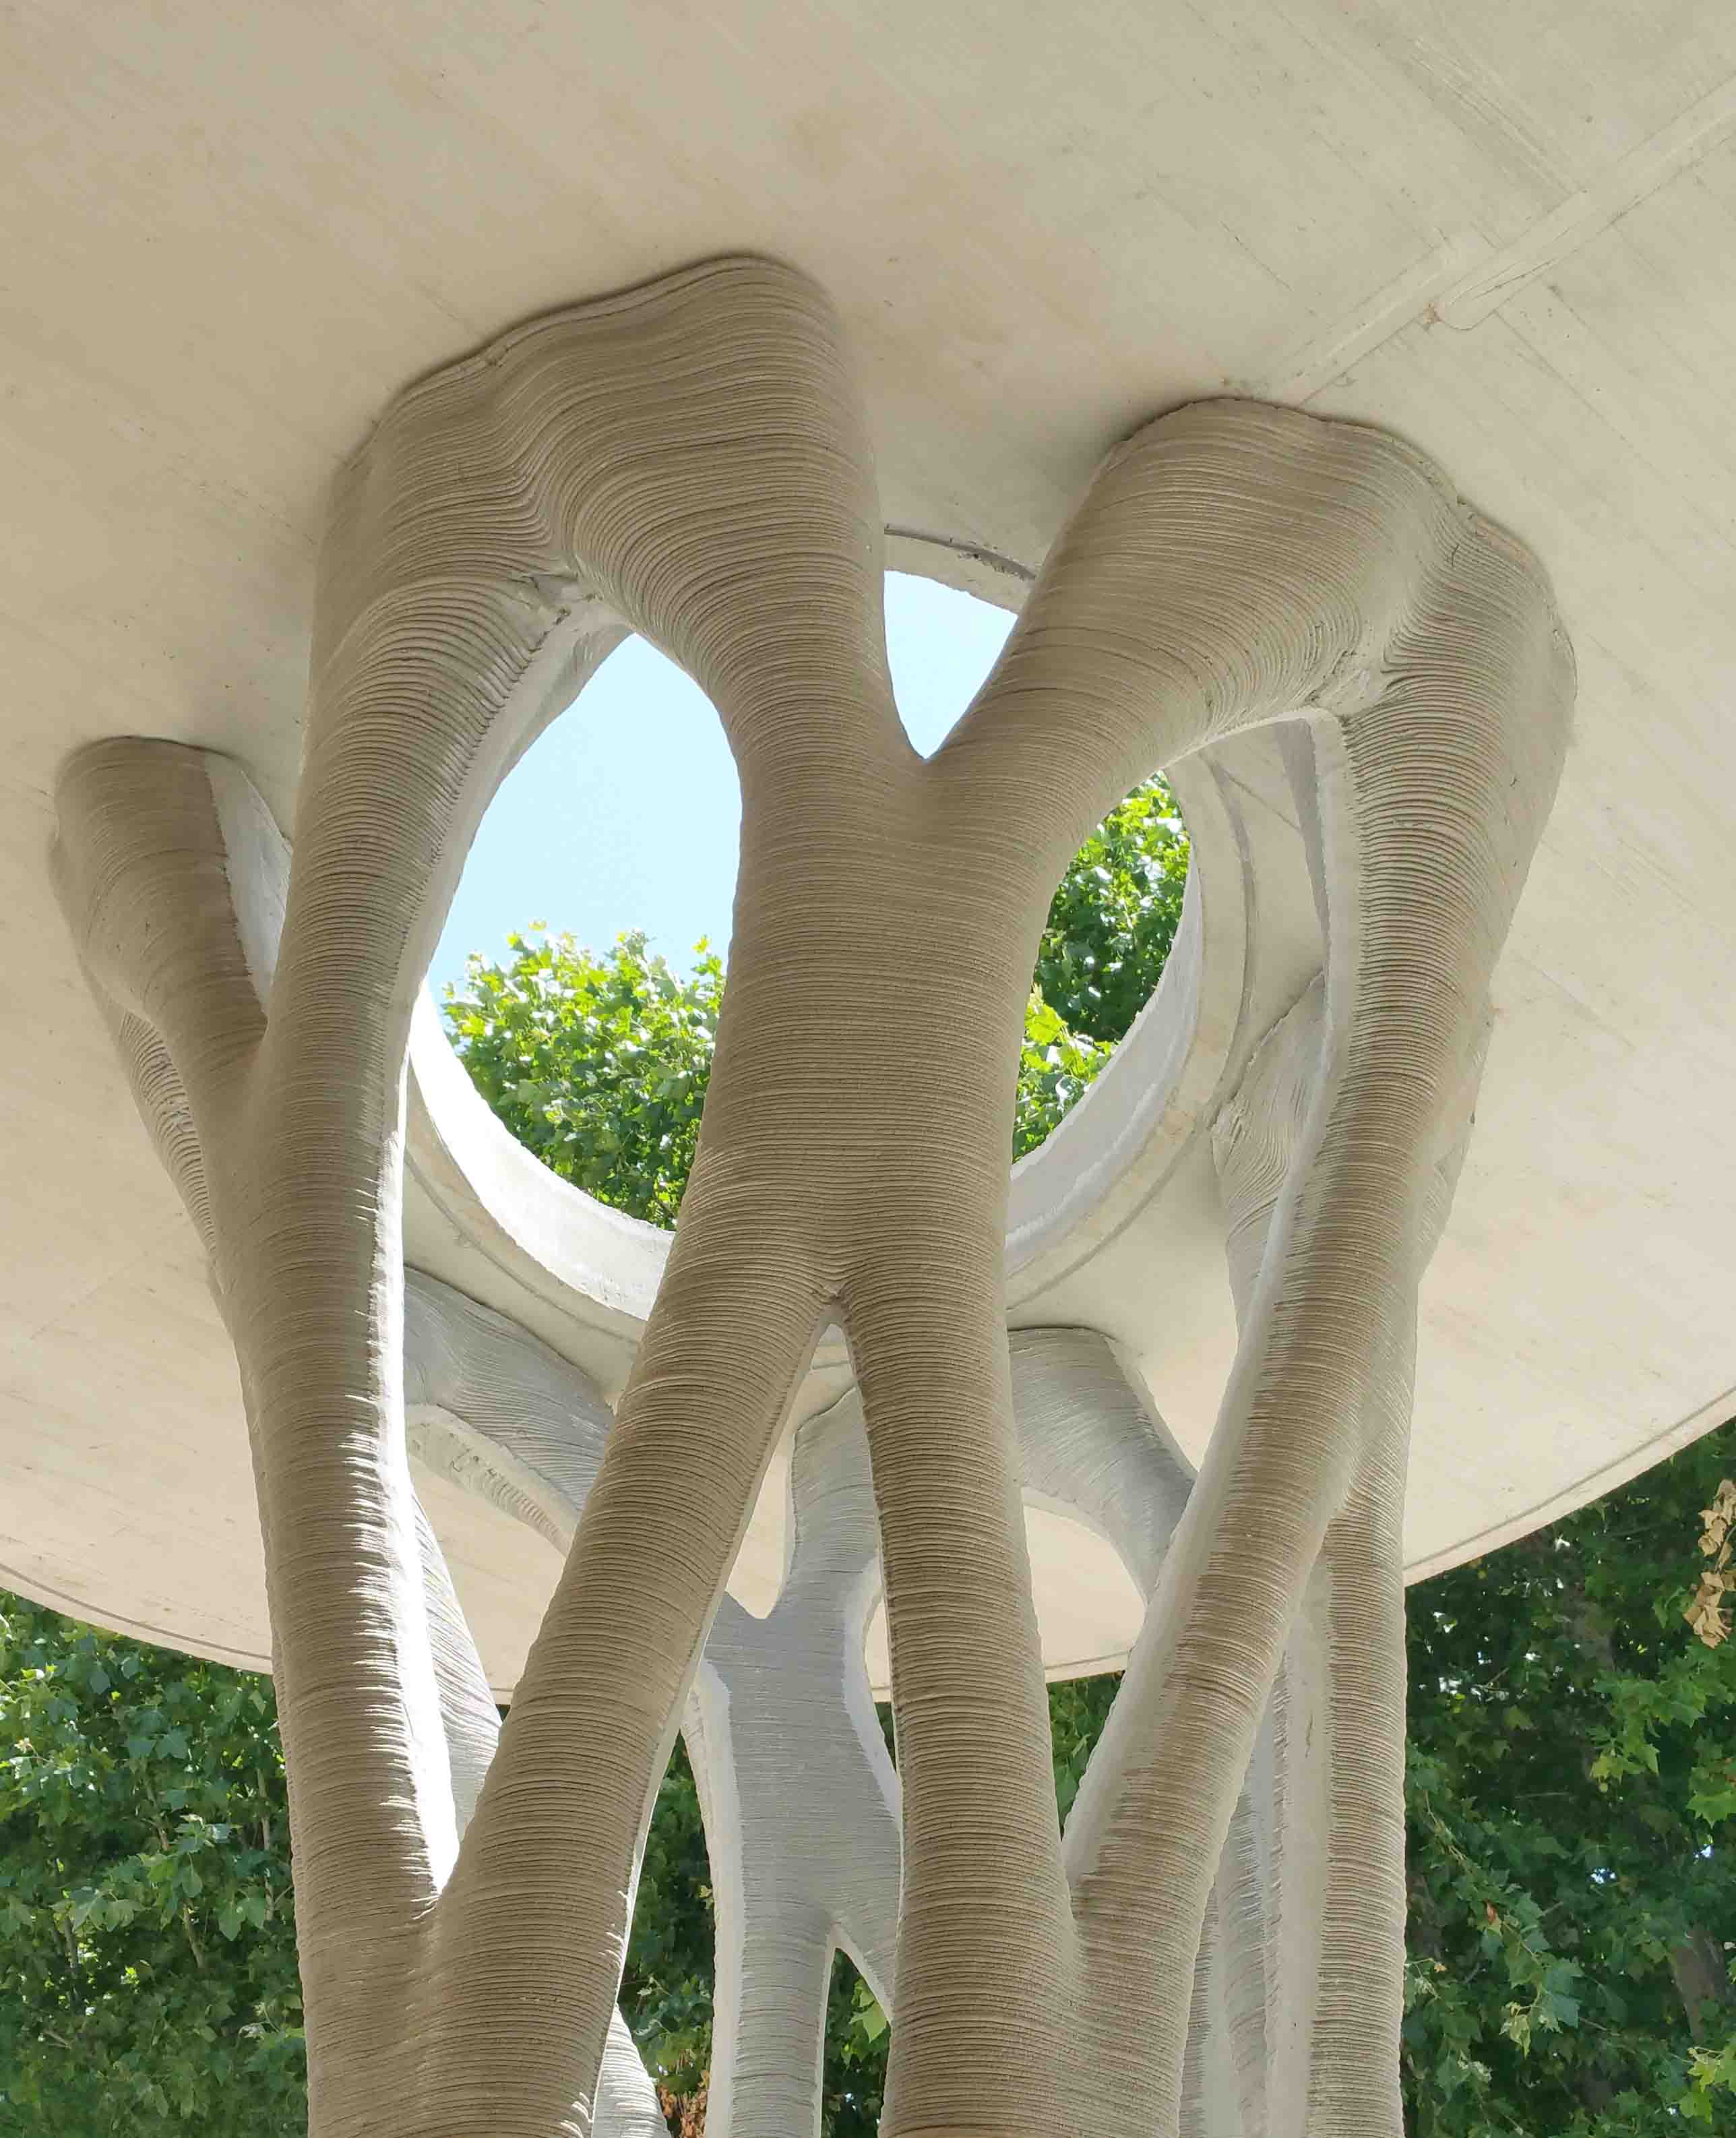 XtreeE 3D-Printed Structural Pillar in Aix small